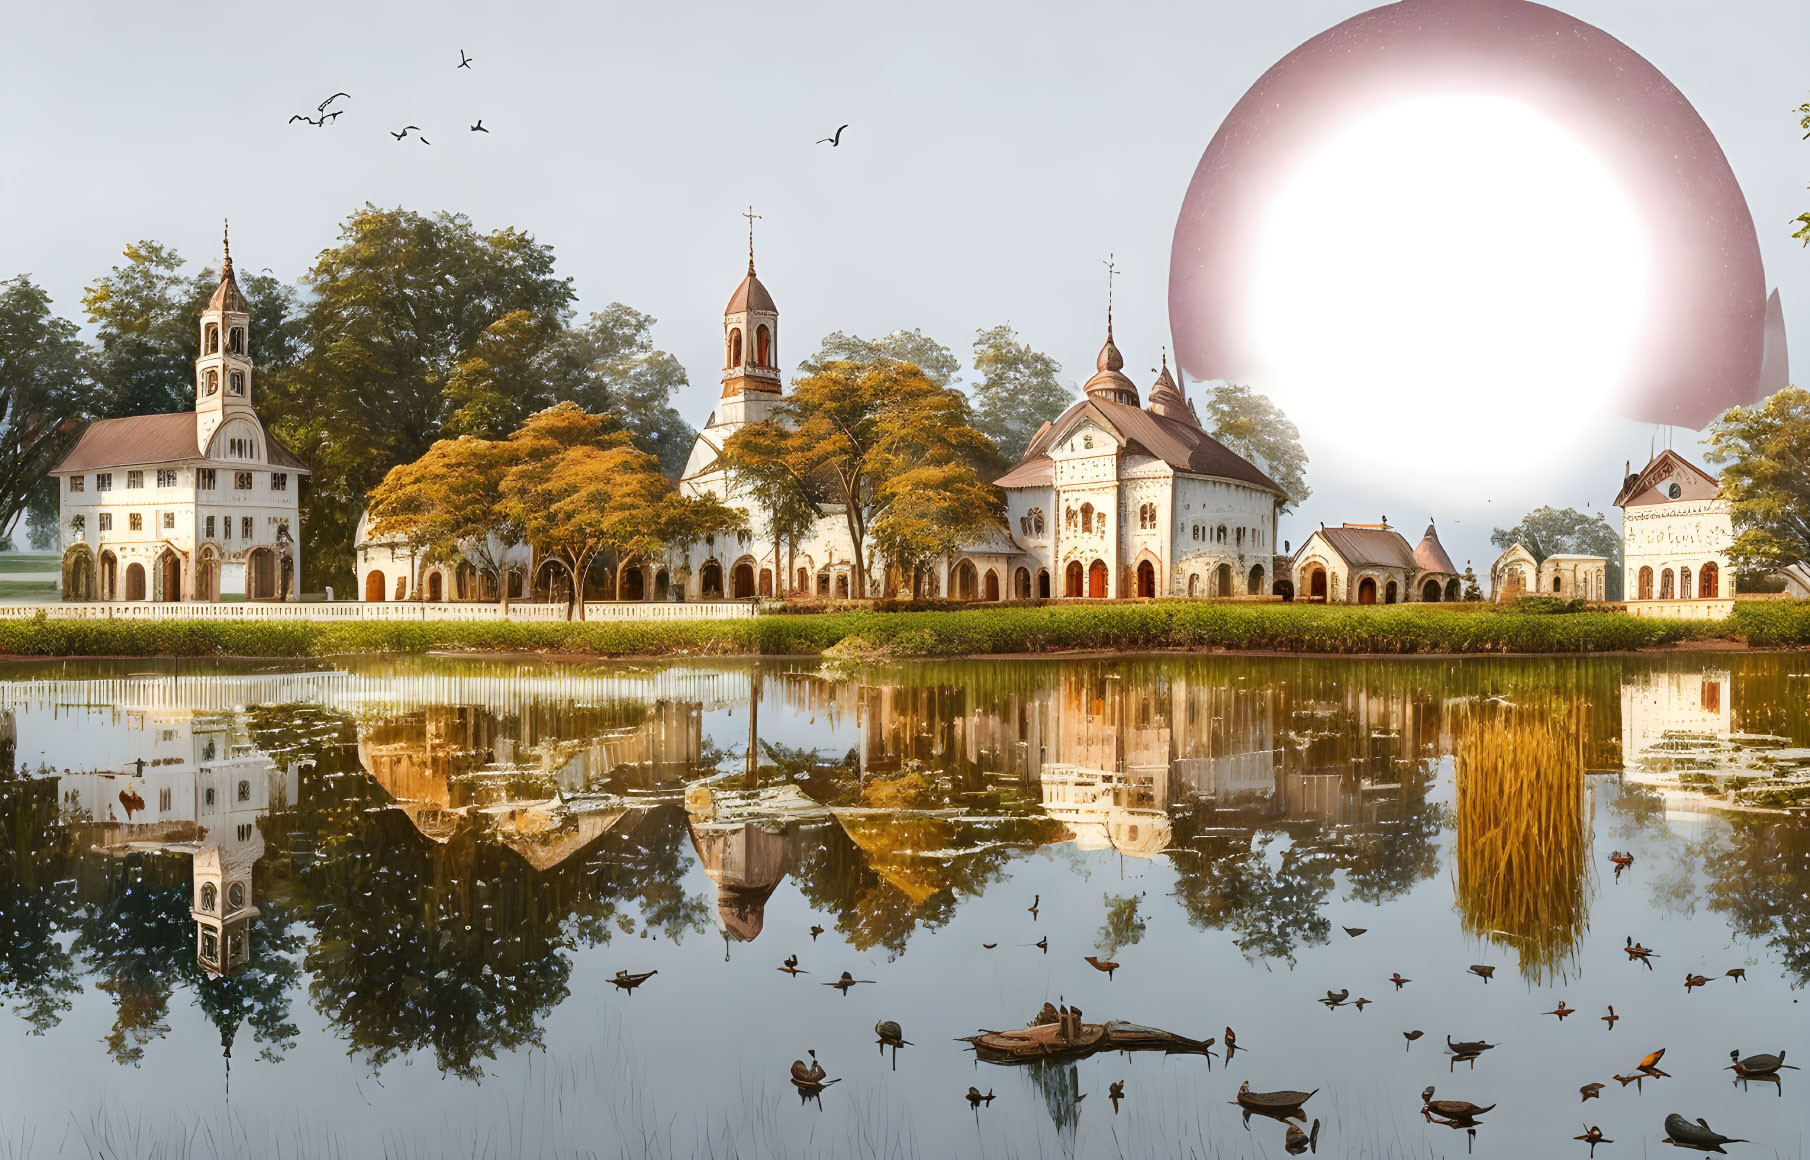 Tranquil landscape with buildings, lake, moon, and birds